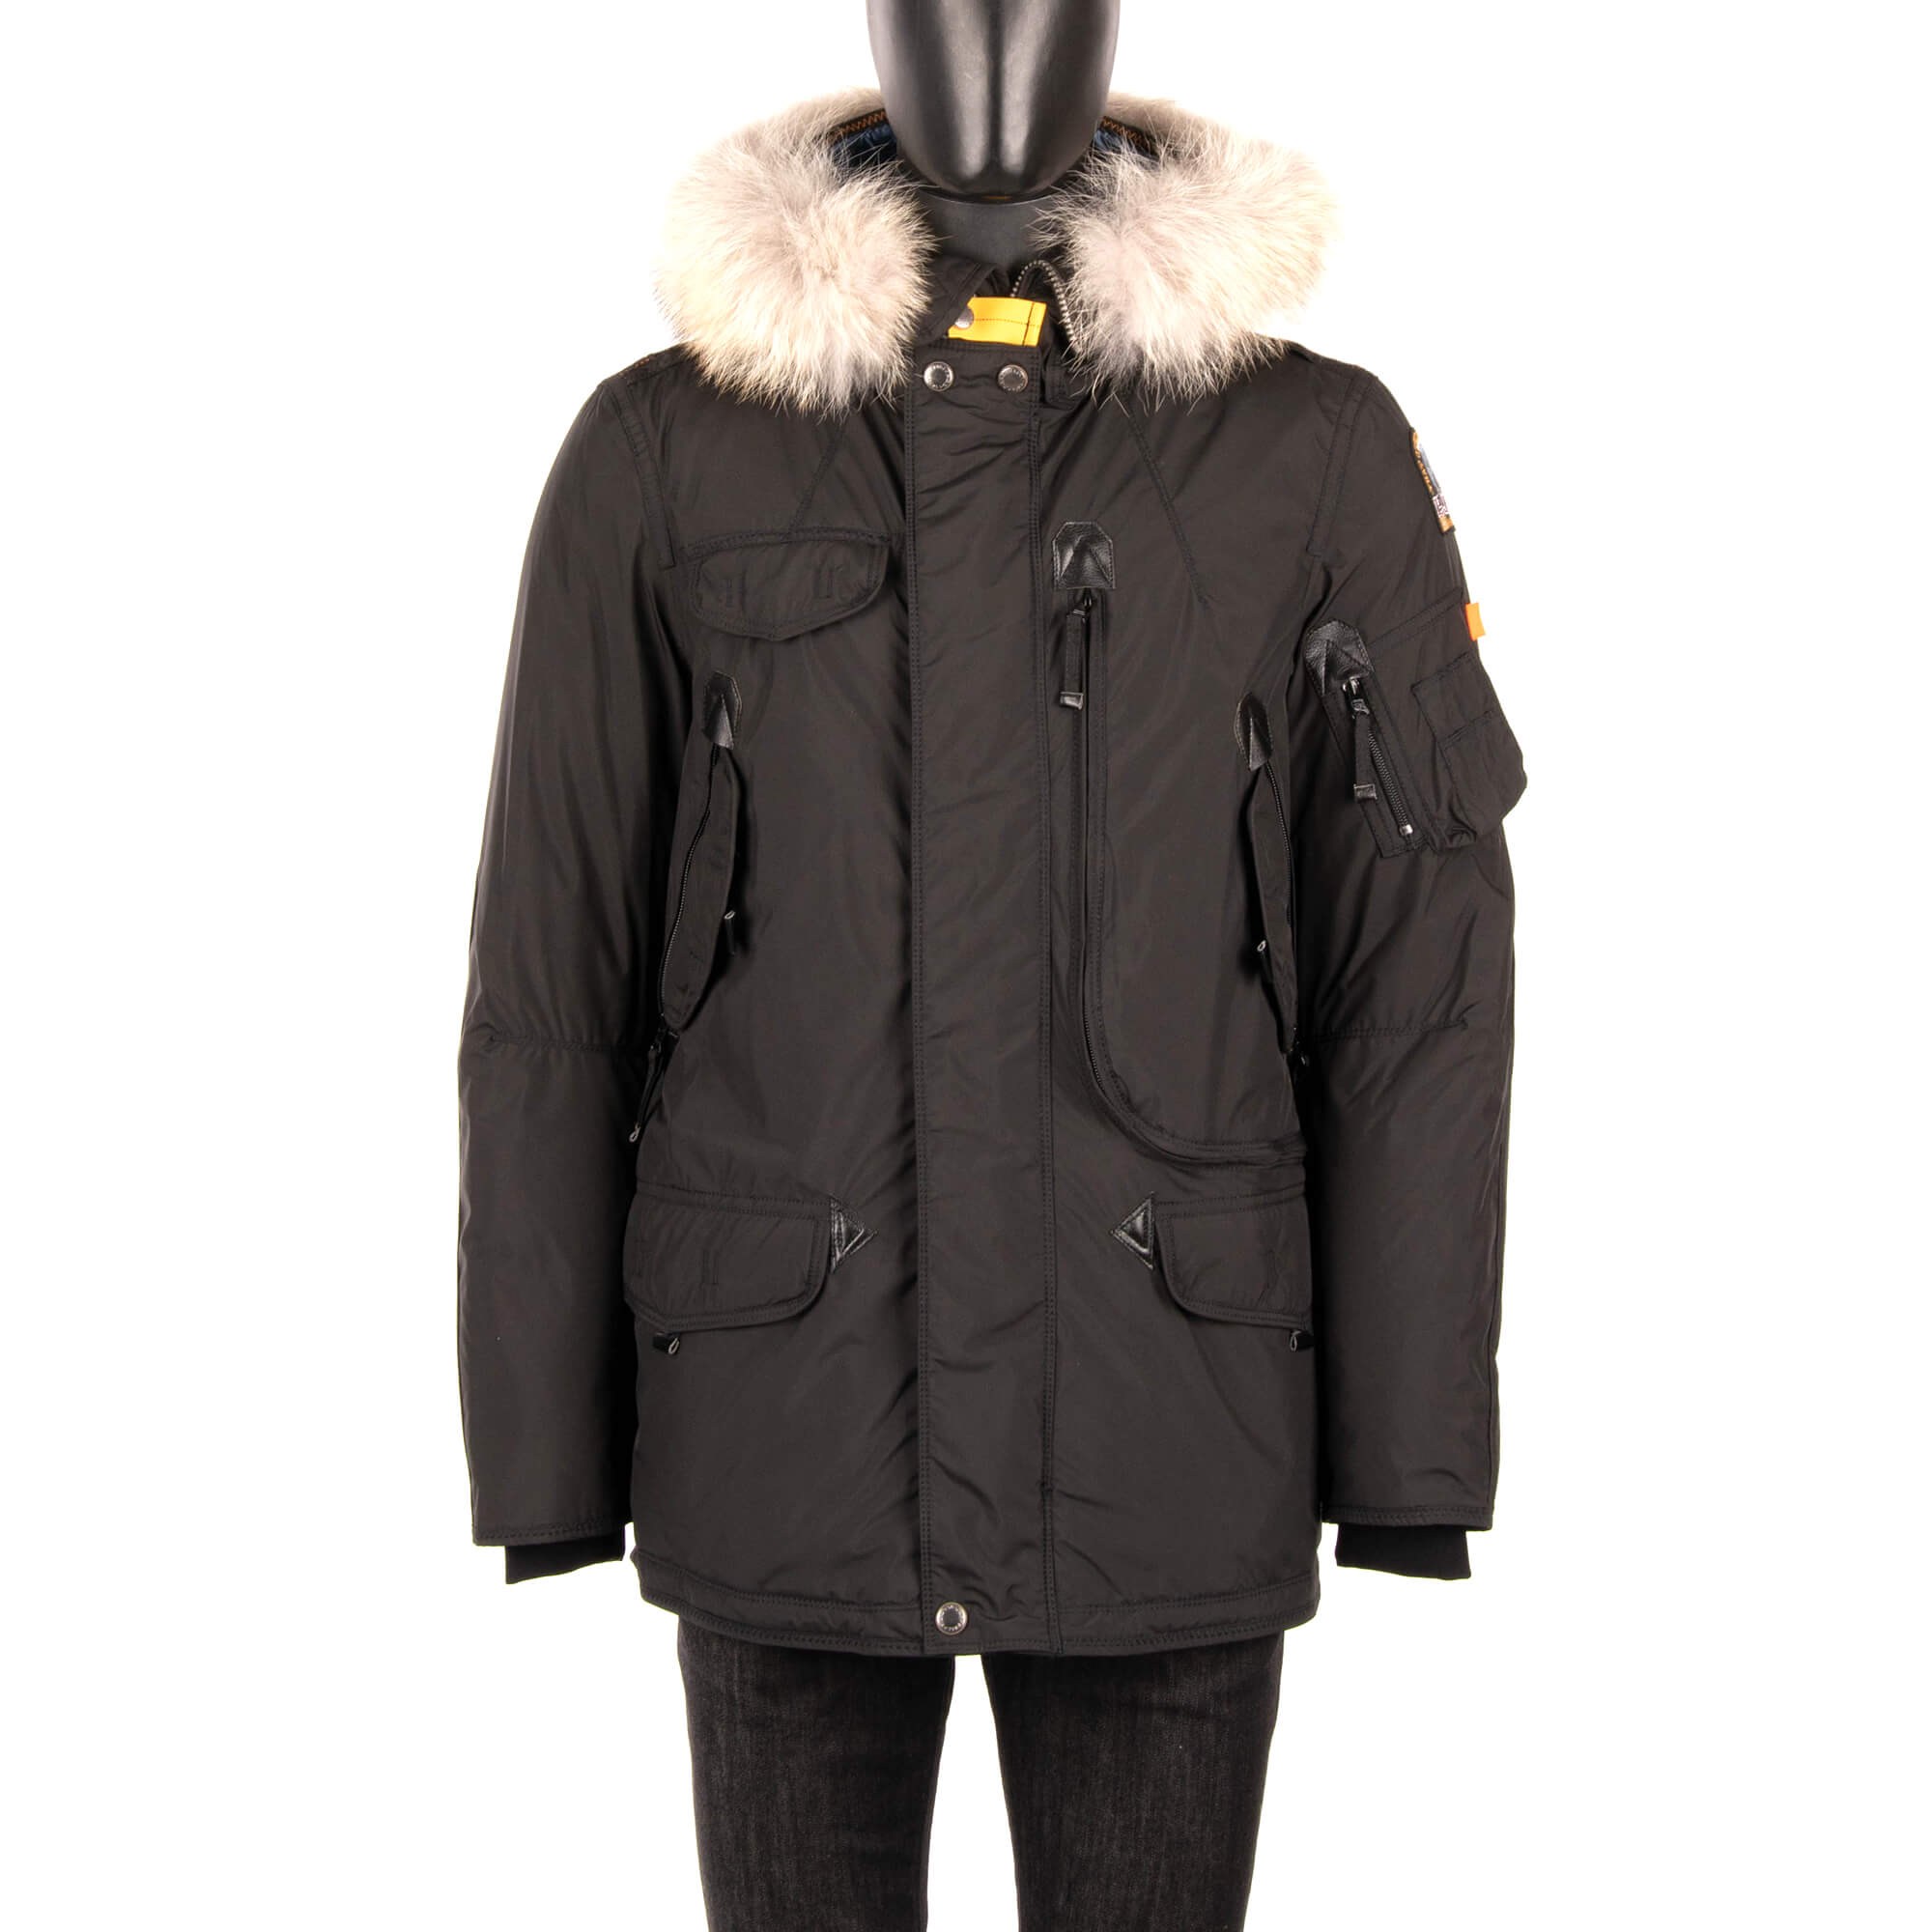 Parajumpers Parka Down Jacket RIGHT HAND LIGHT with Fur Hoody Black ...